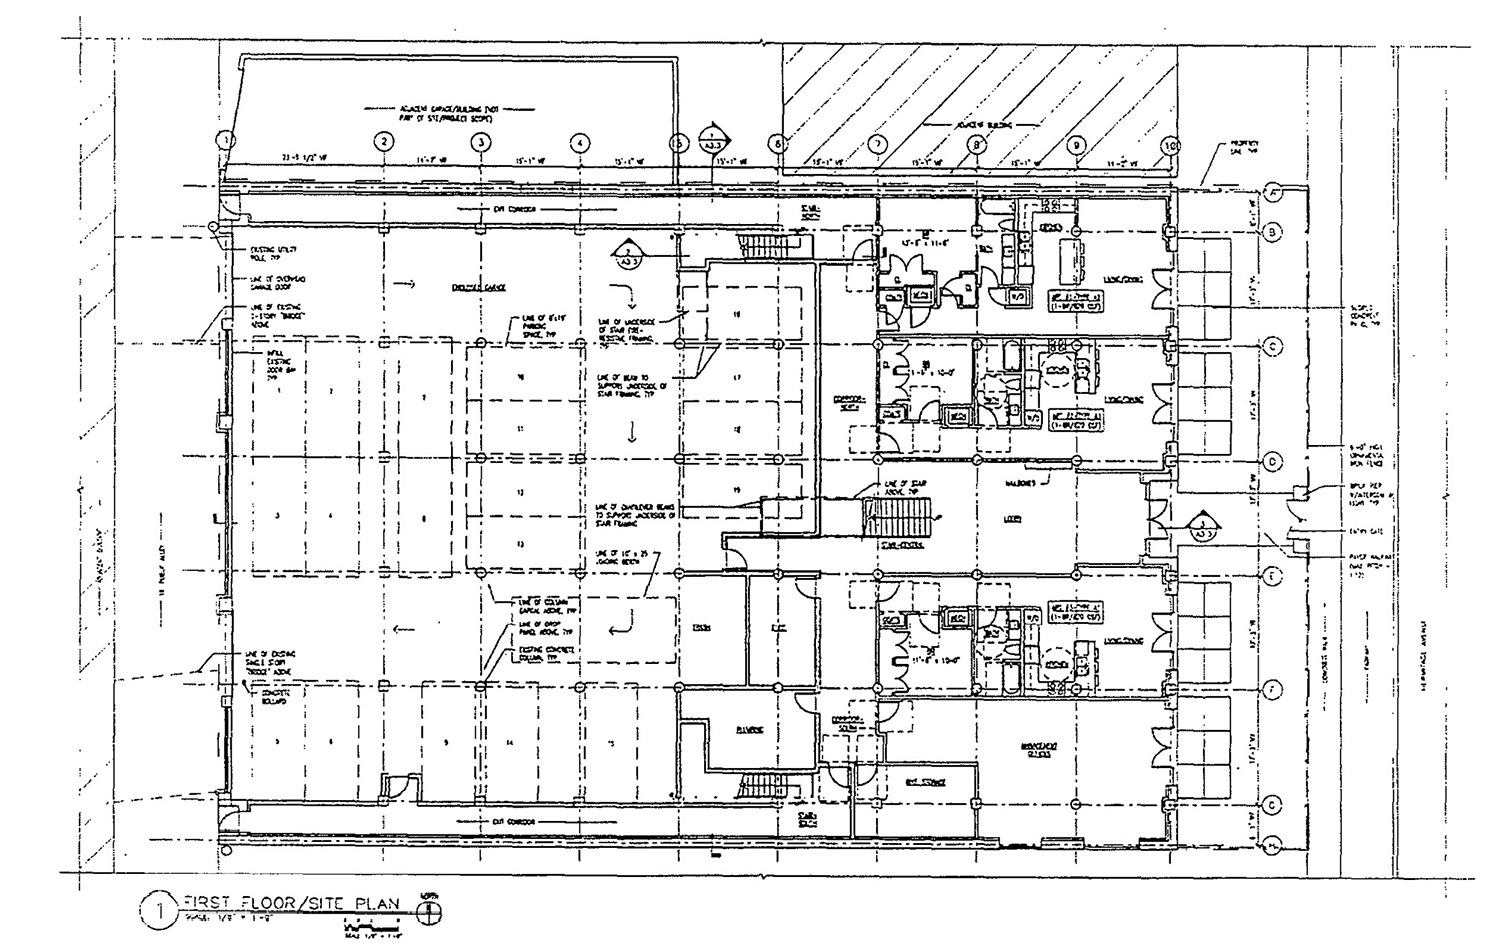 Ground Floor Plan for 4046 N Hermitage Avenue. Drawing by Foster Dale Architects